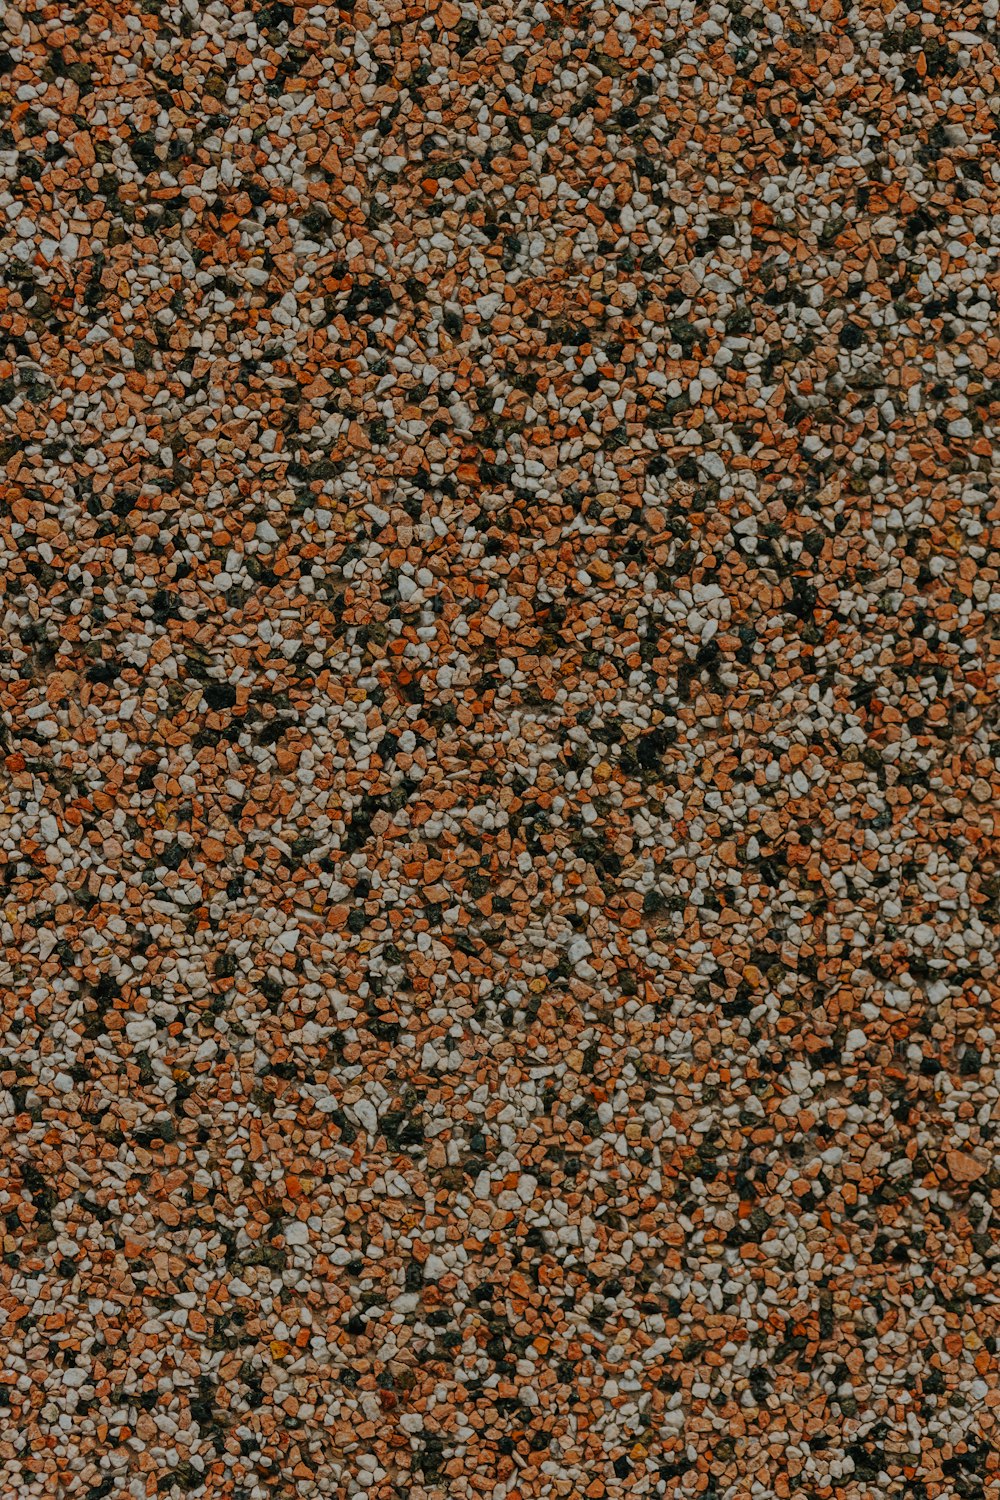 a close up of an orange and black speckled surface